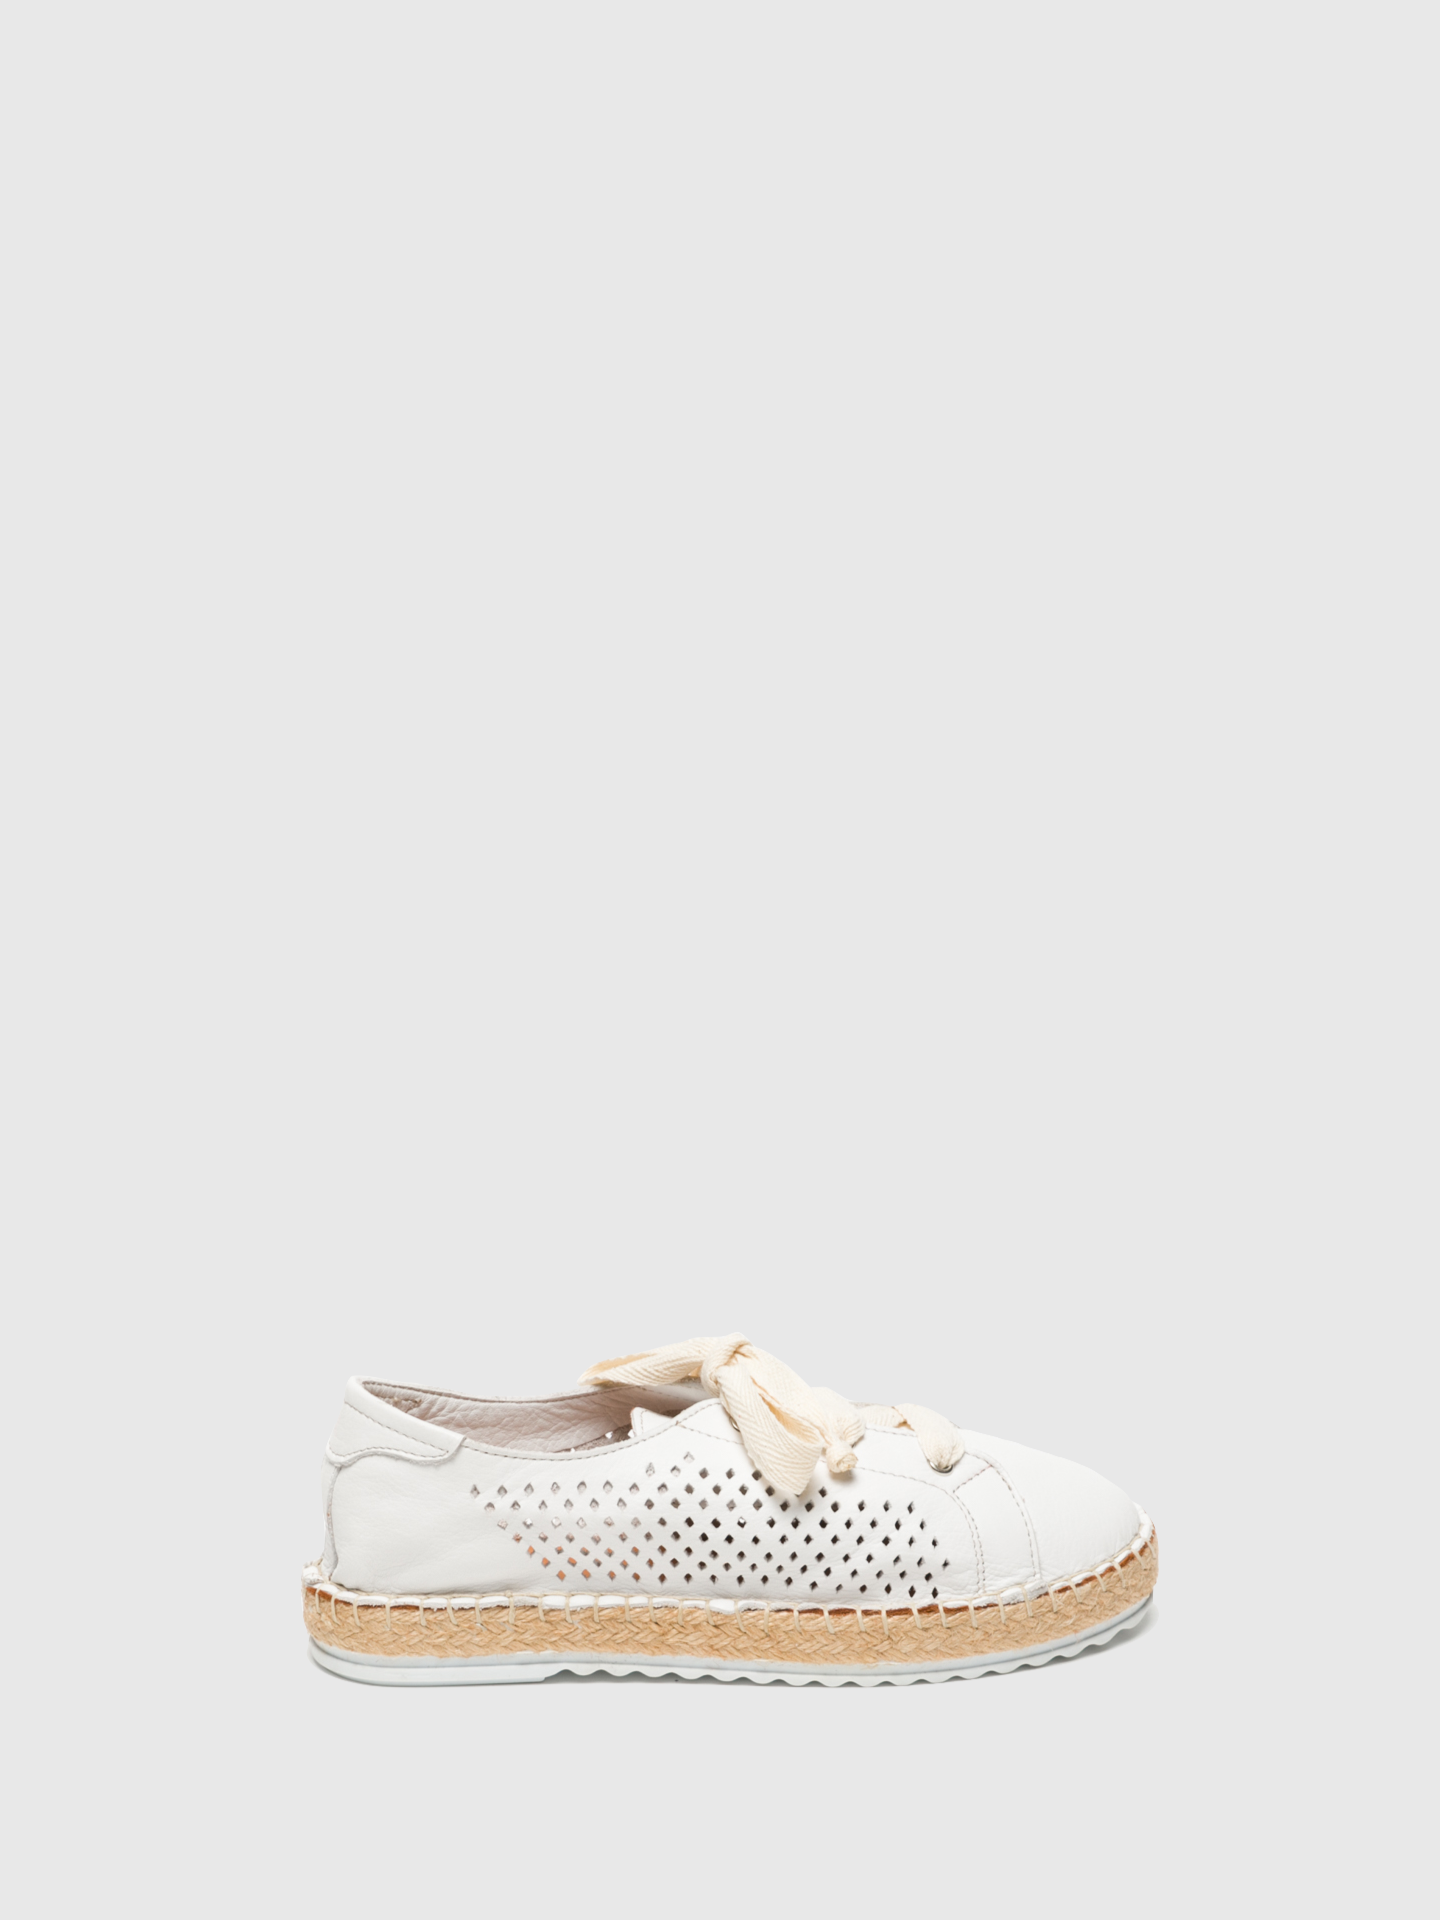 Foreva White Lace-up Trainers